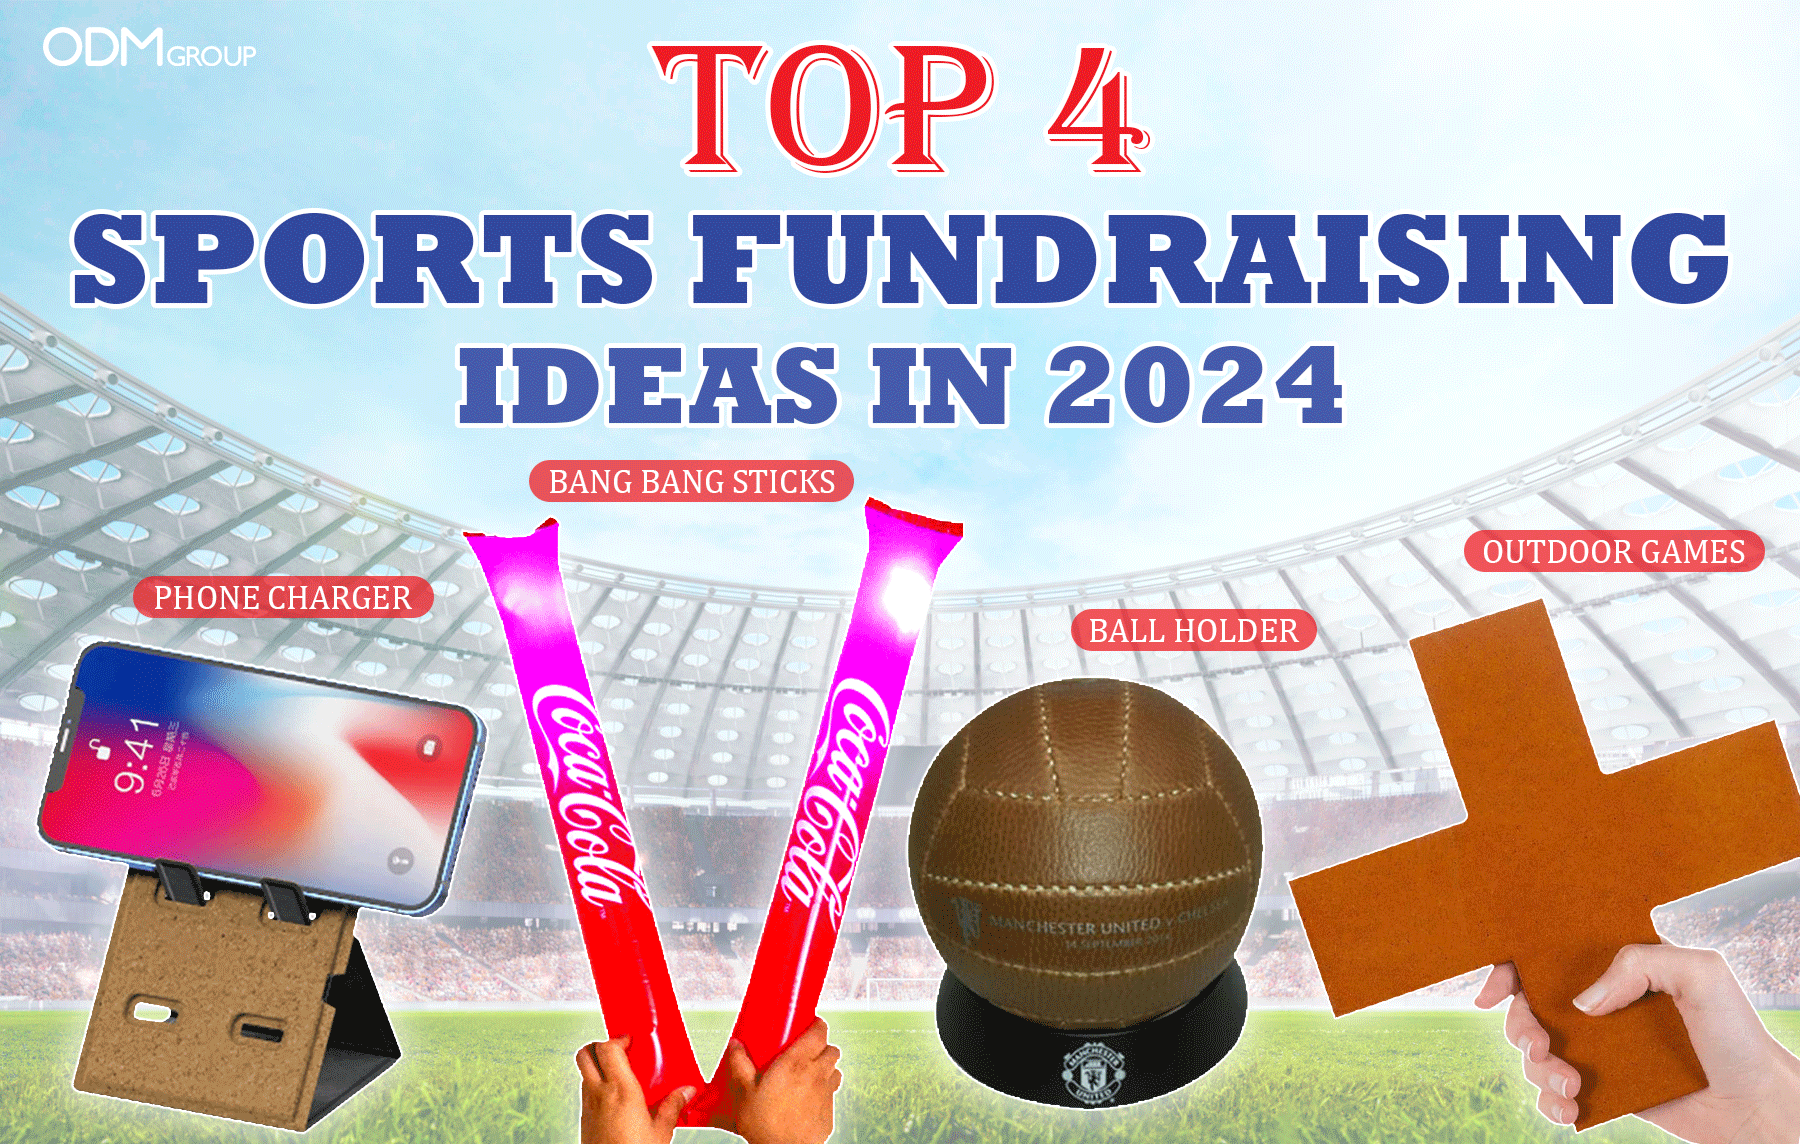 Top 4 Sports Fundraising Ideas in 2024